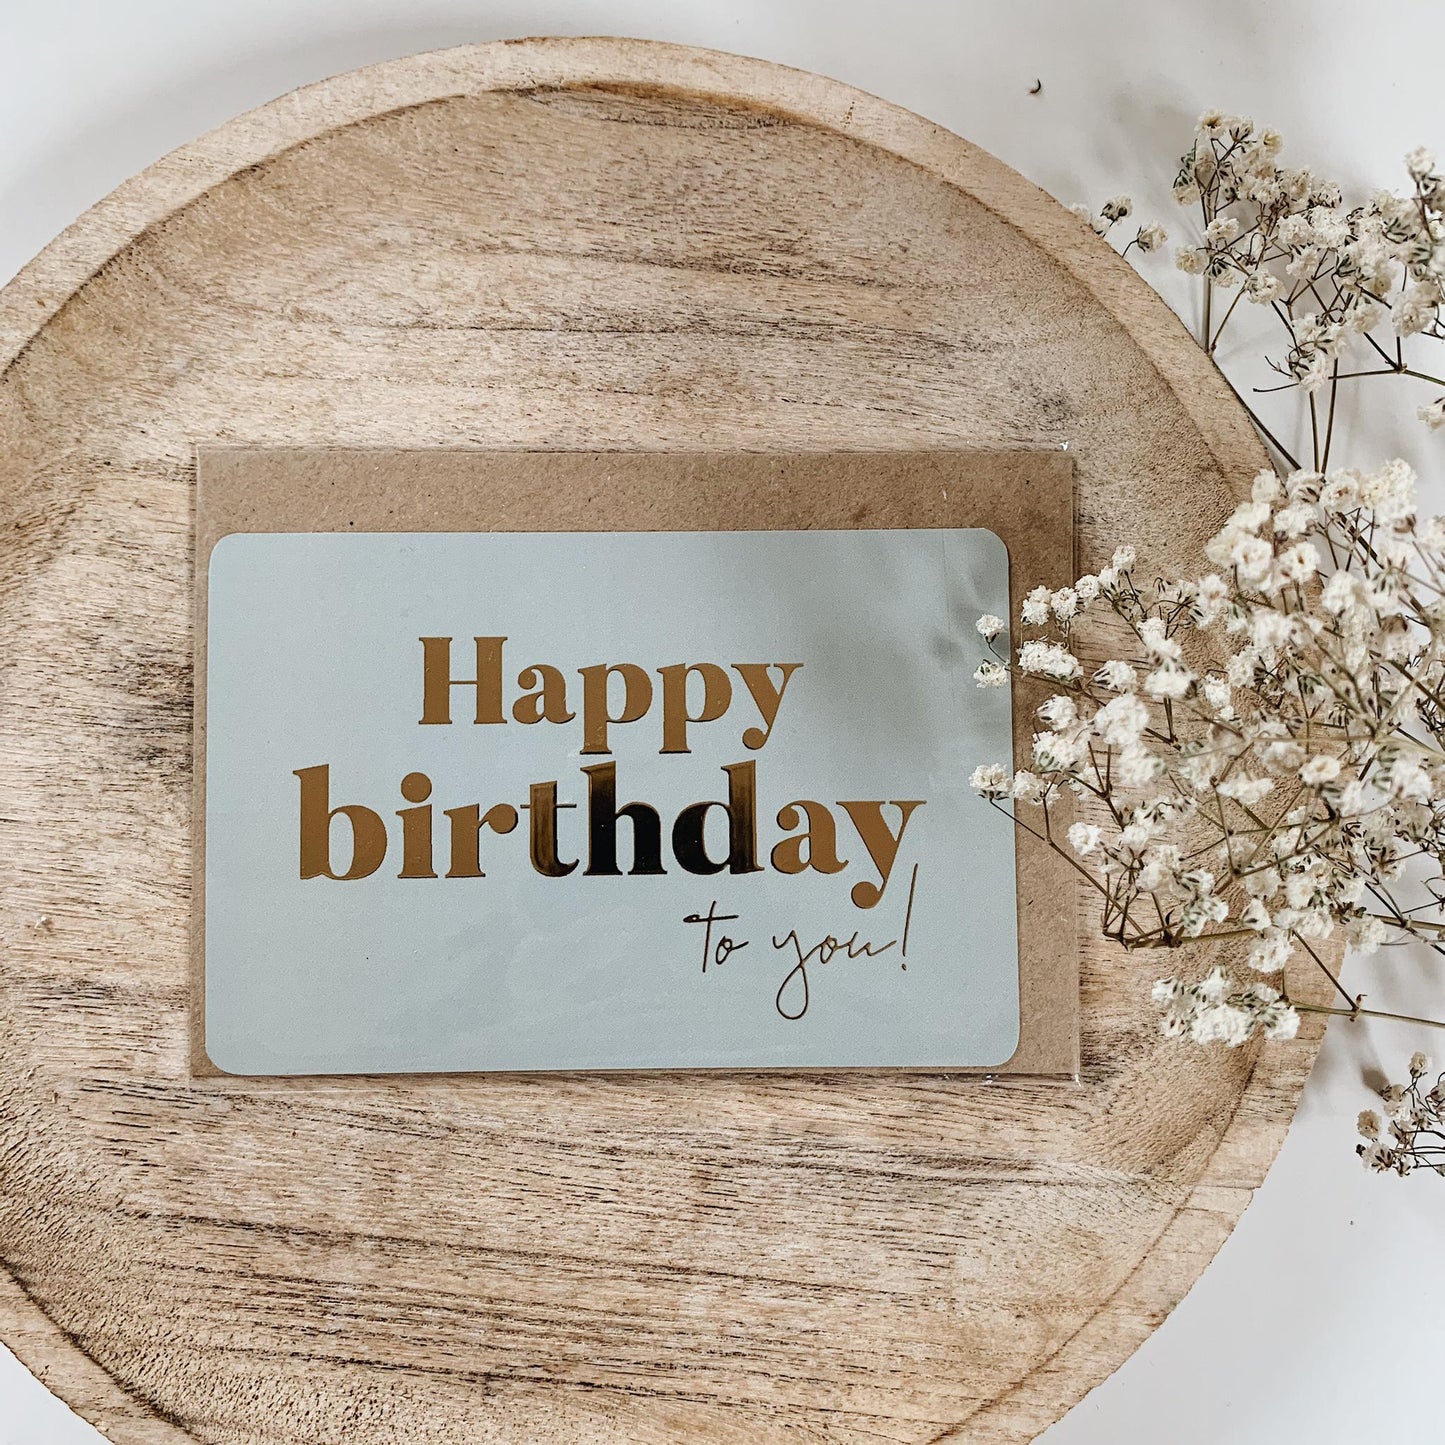 CARTE DE VOEUX "HAPPY BIRTHDAY TO YOU" GOLD - SEVEN PAPER